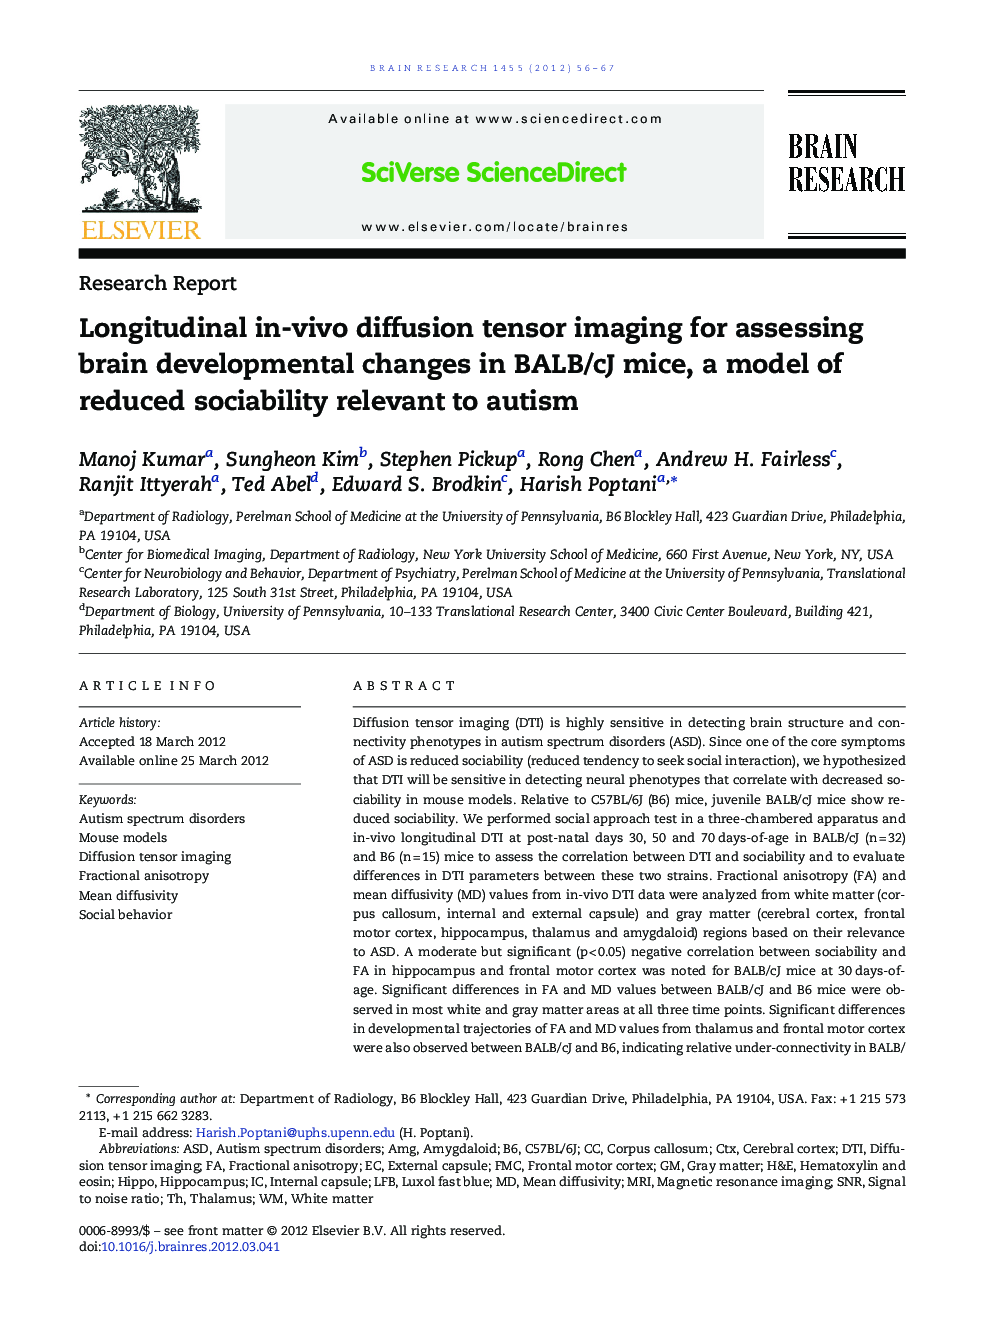 Longitudinal in-vivo diffusion tensor imaging for assessing brain developmental changes in BALB/cJ mice, a model of reduced sociability relevant to autism